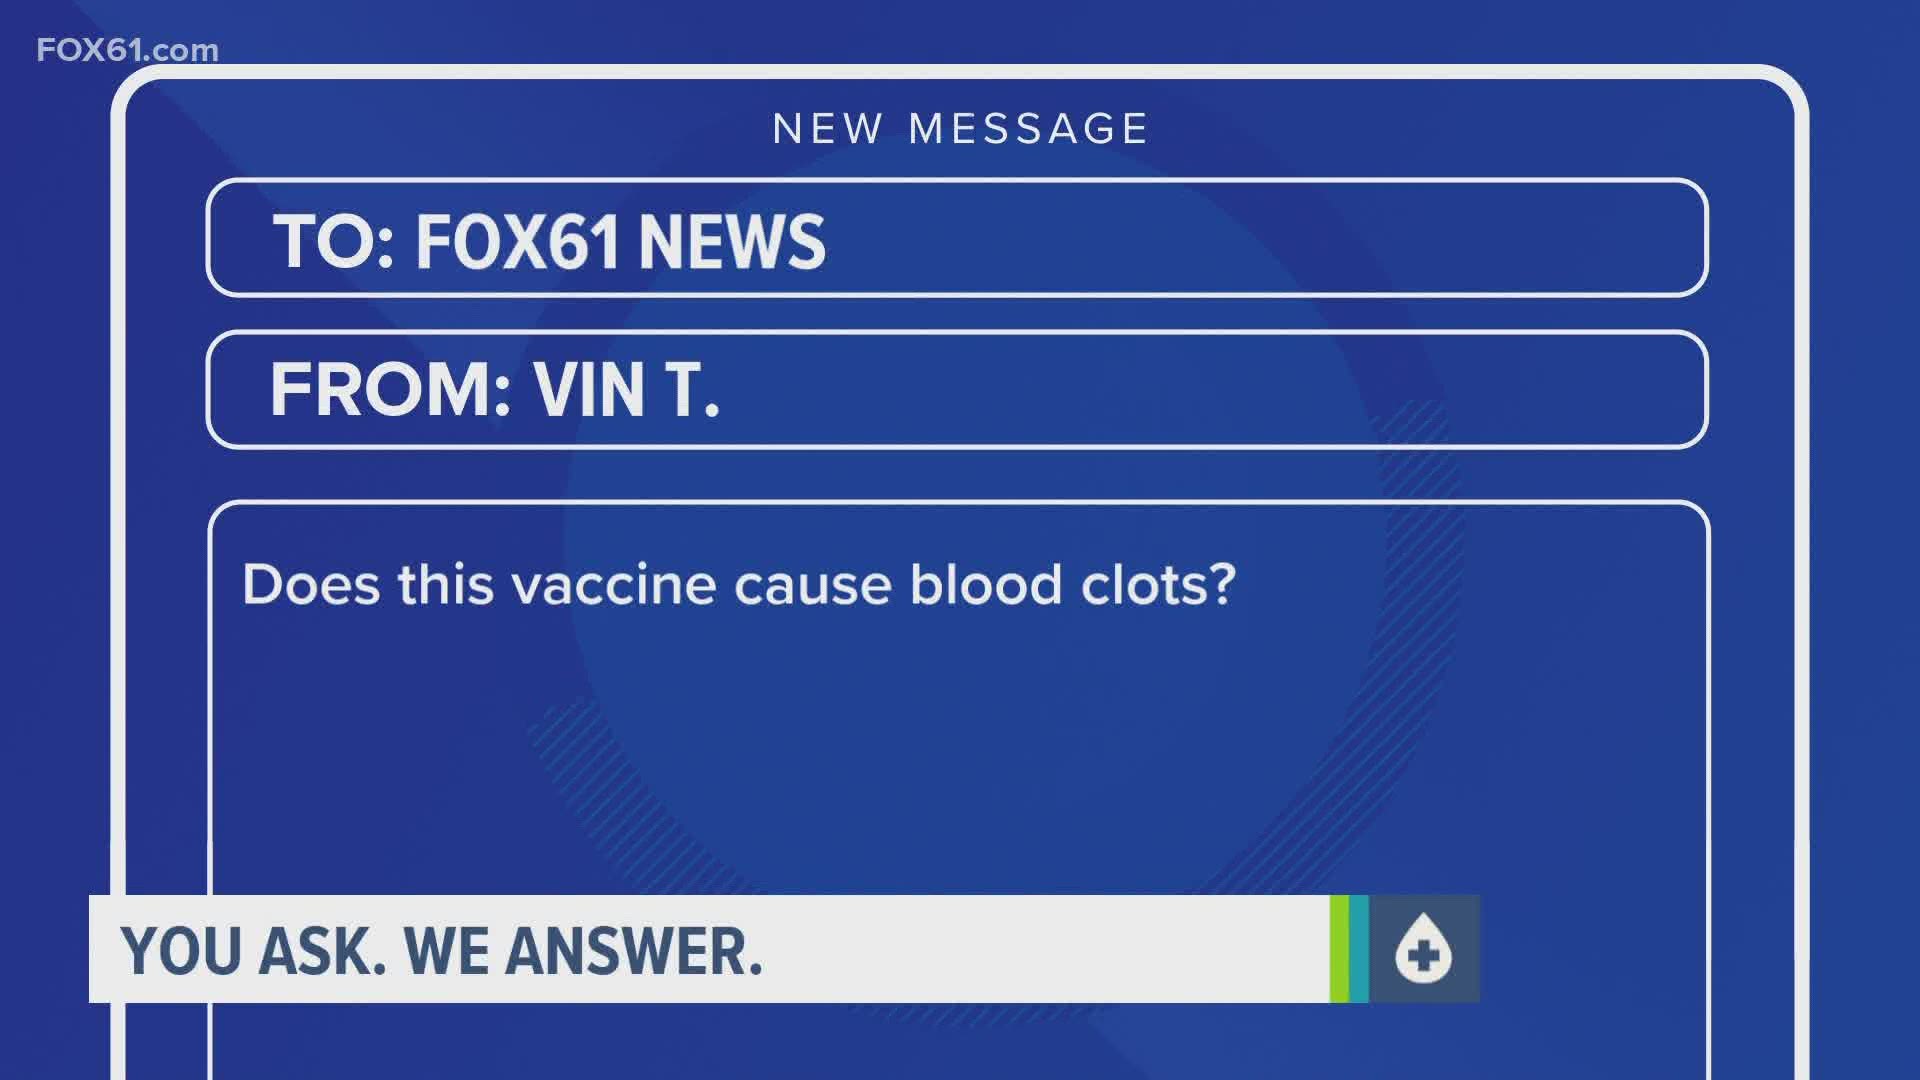 “Does this vaccine cause blood clots?”